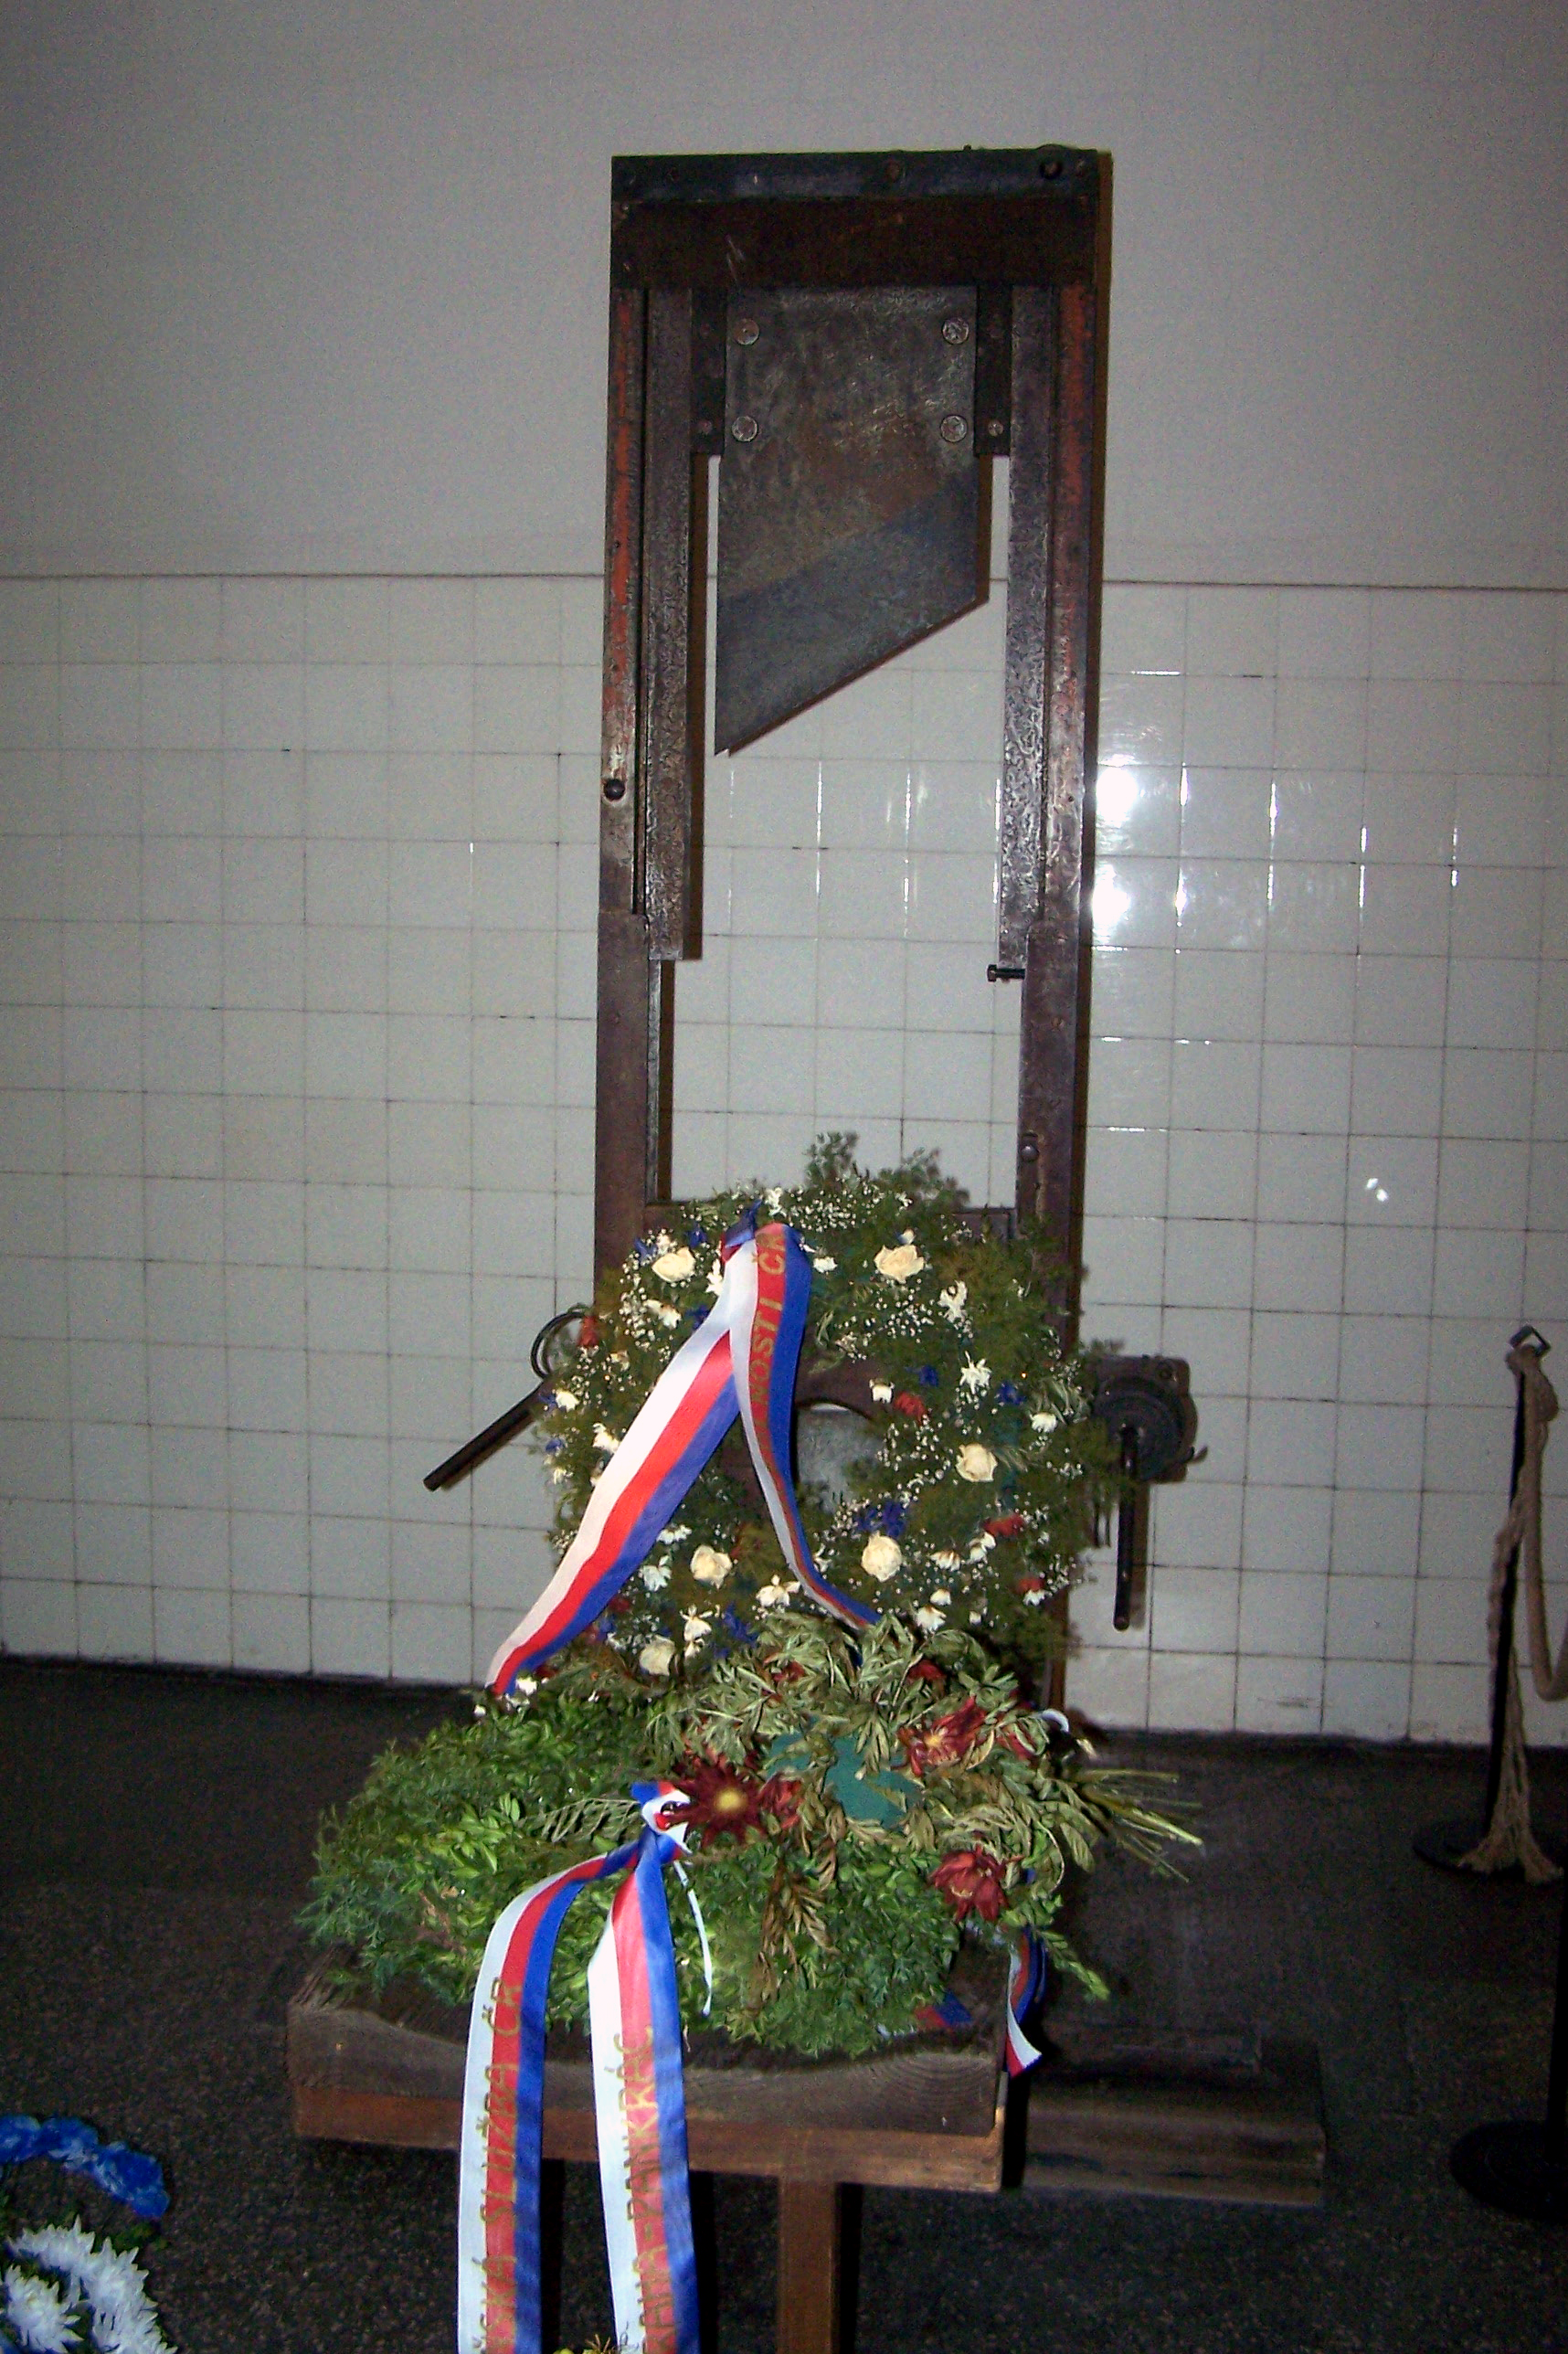 Guillotine in the so-called "axe room" of the memorial